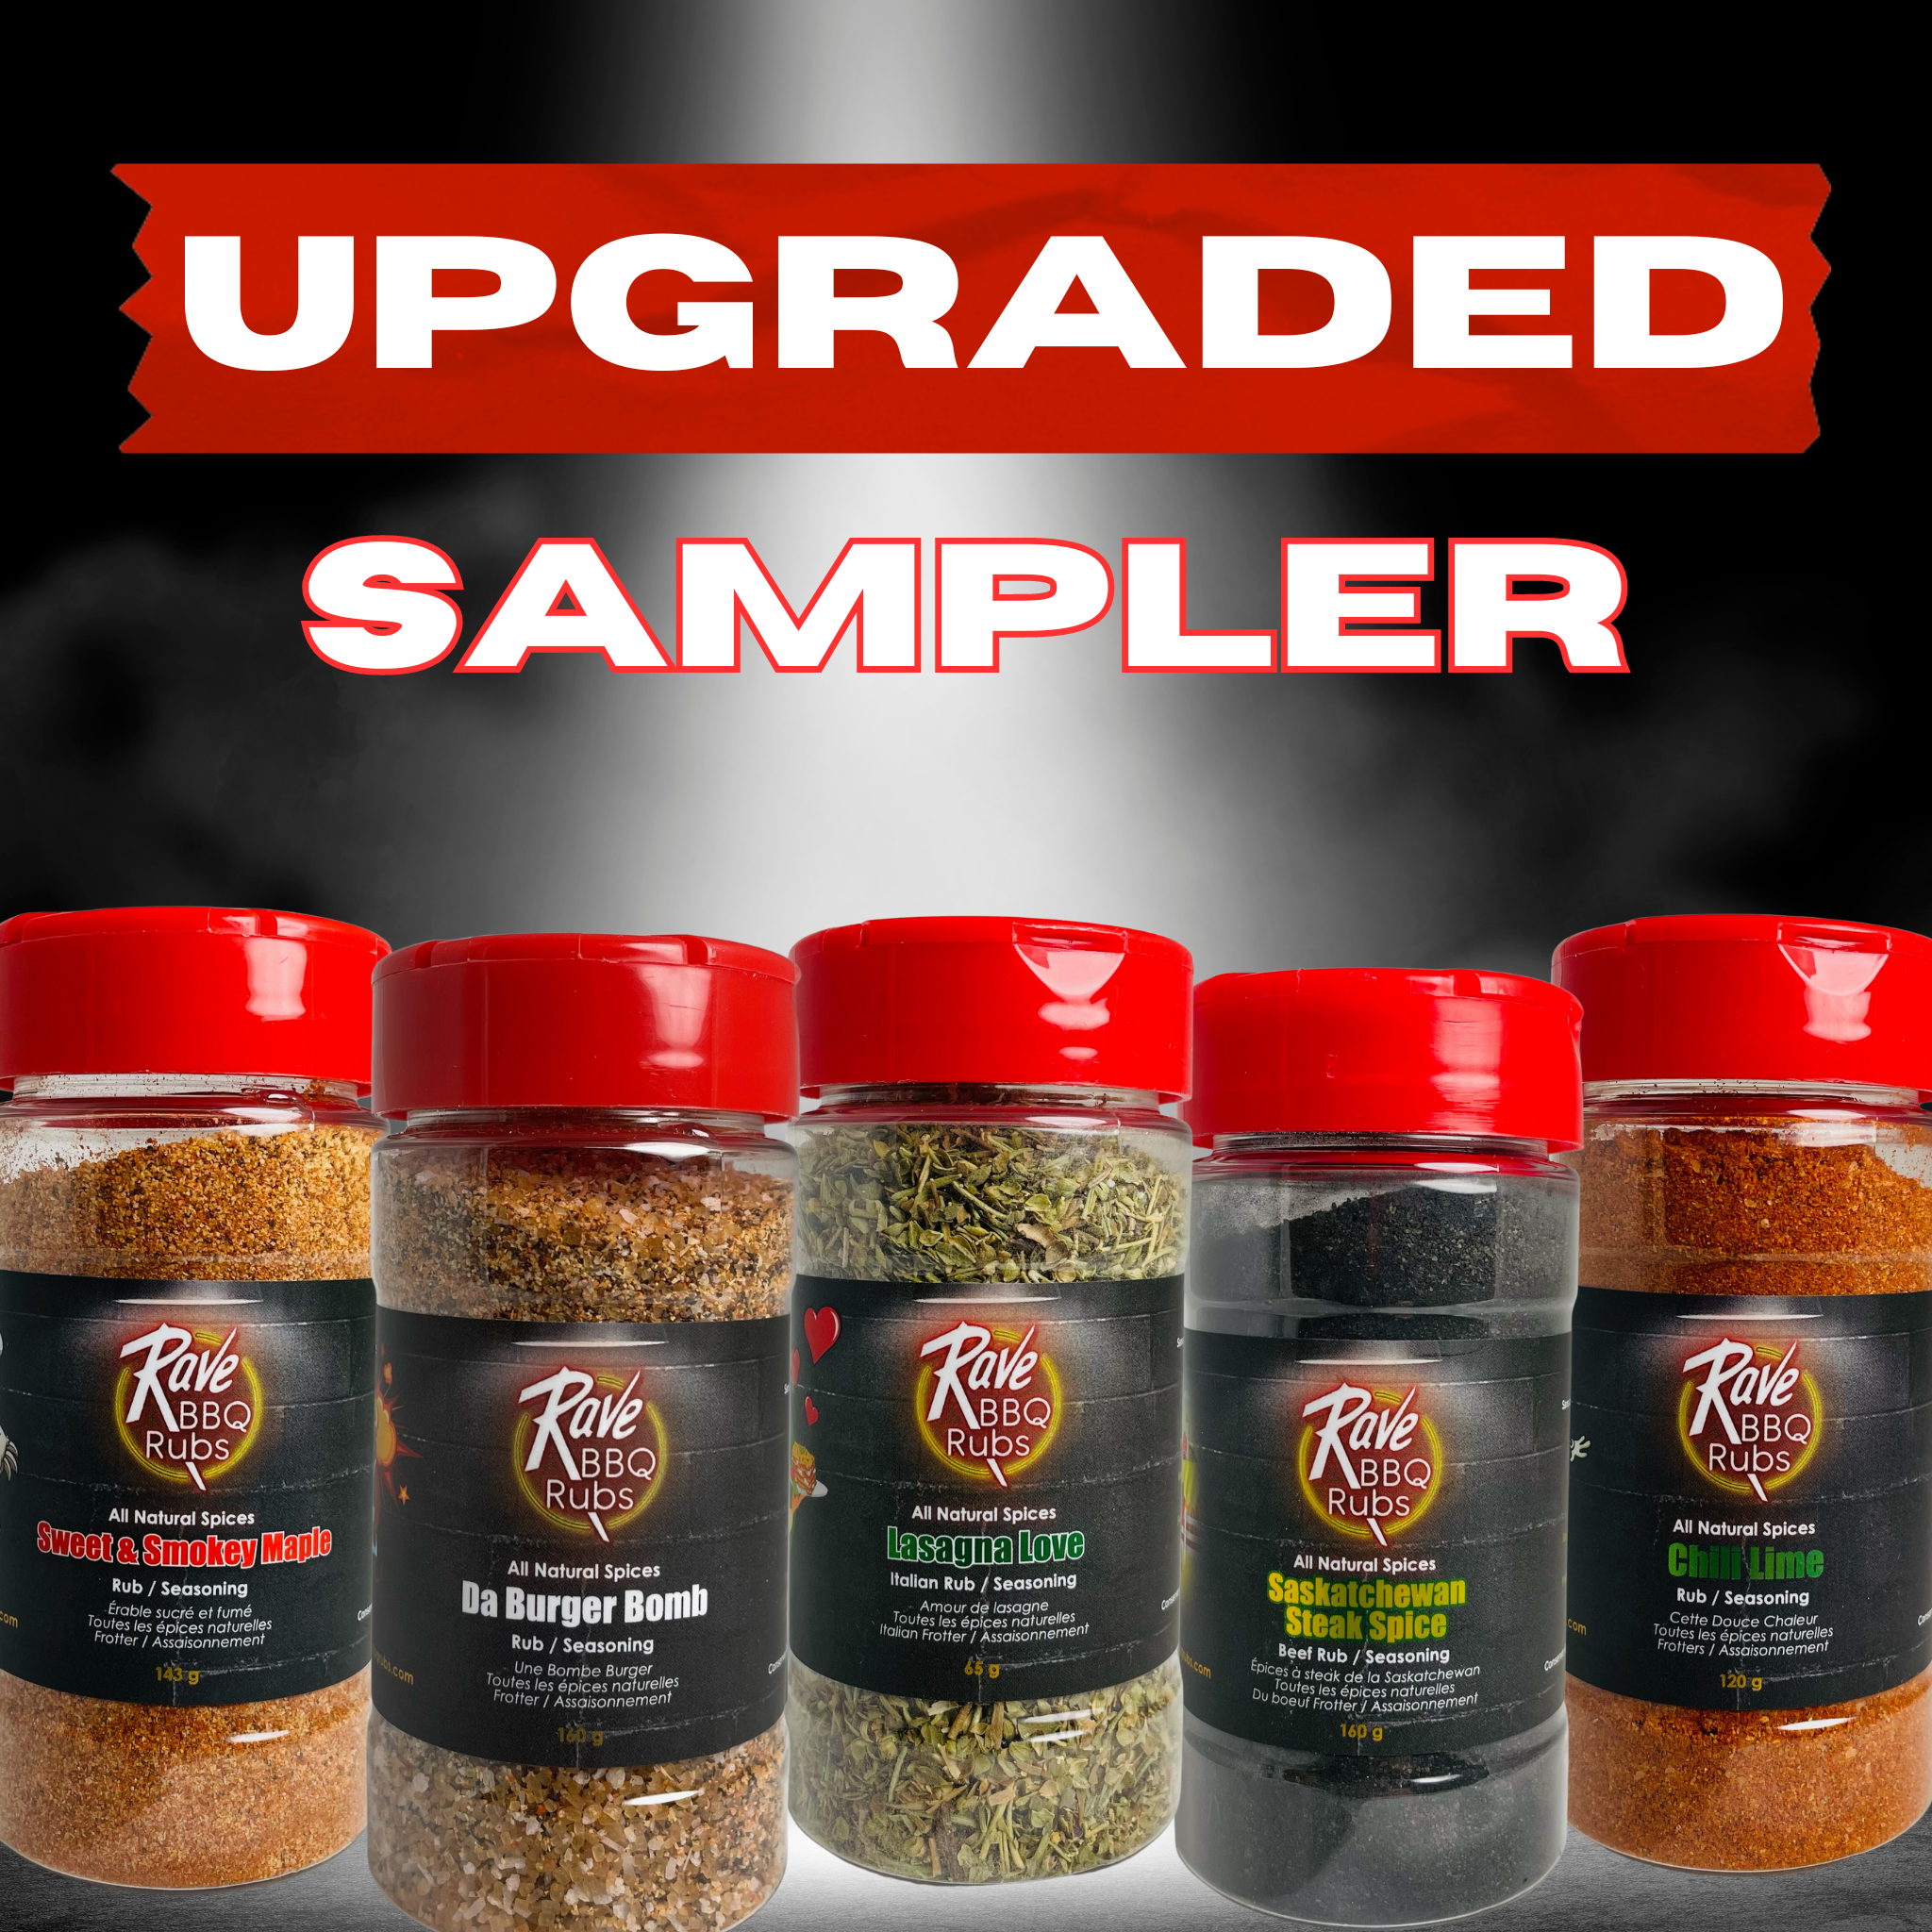 The Upgraded Sampler Bundle - Mix and Match Any 5 Shakers